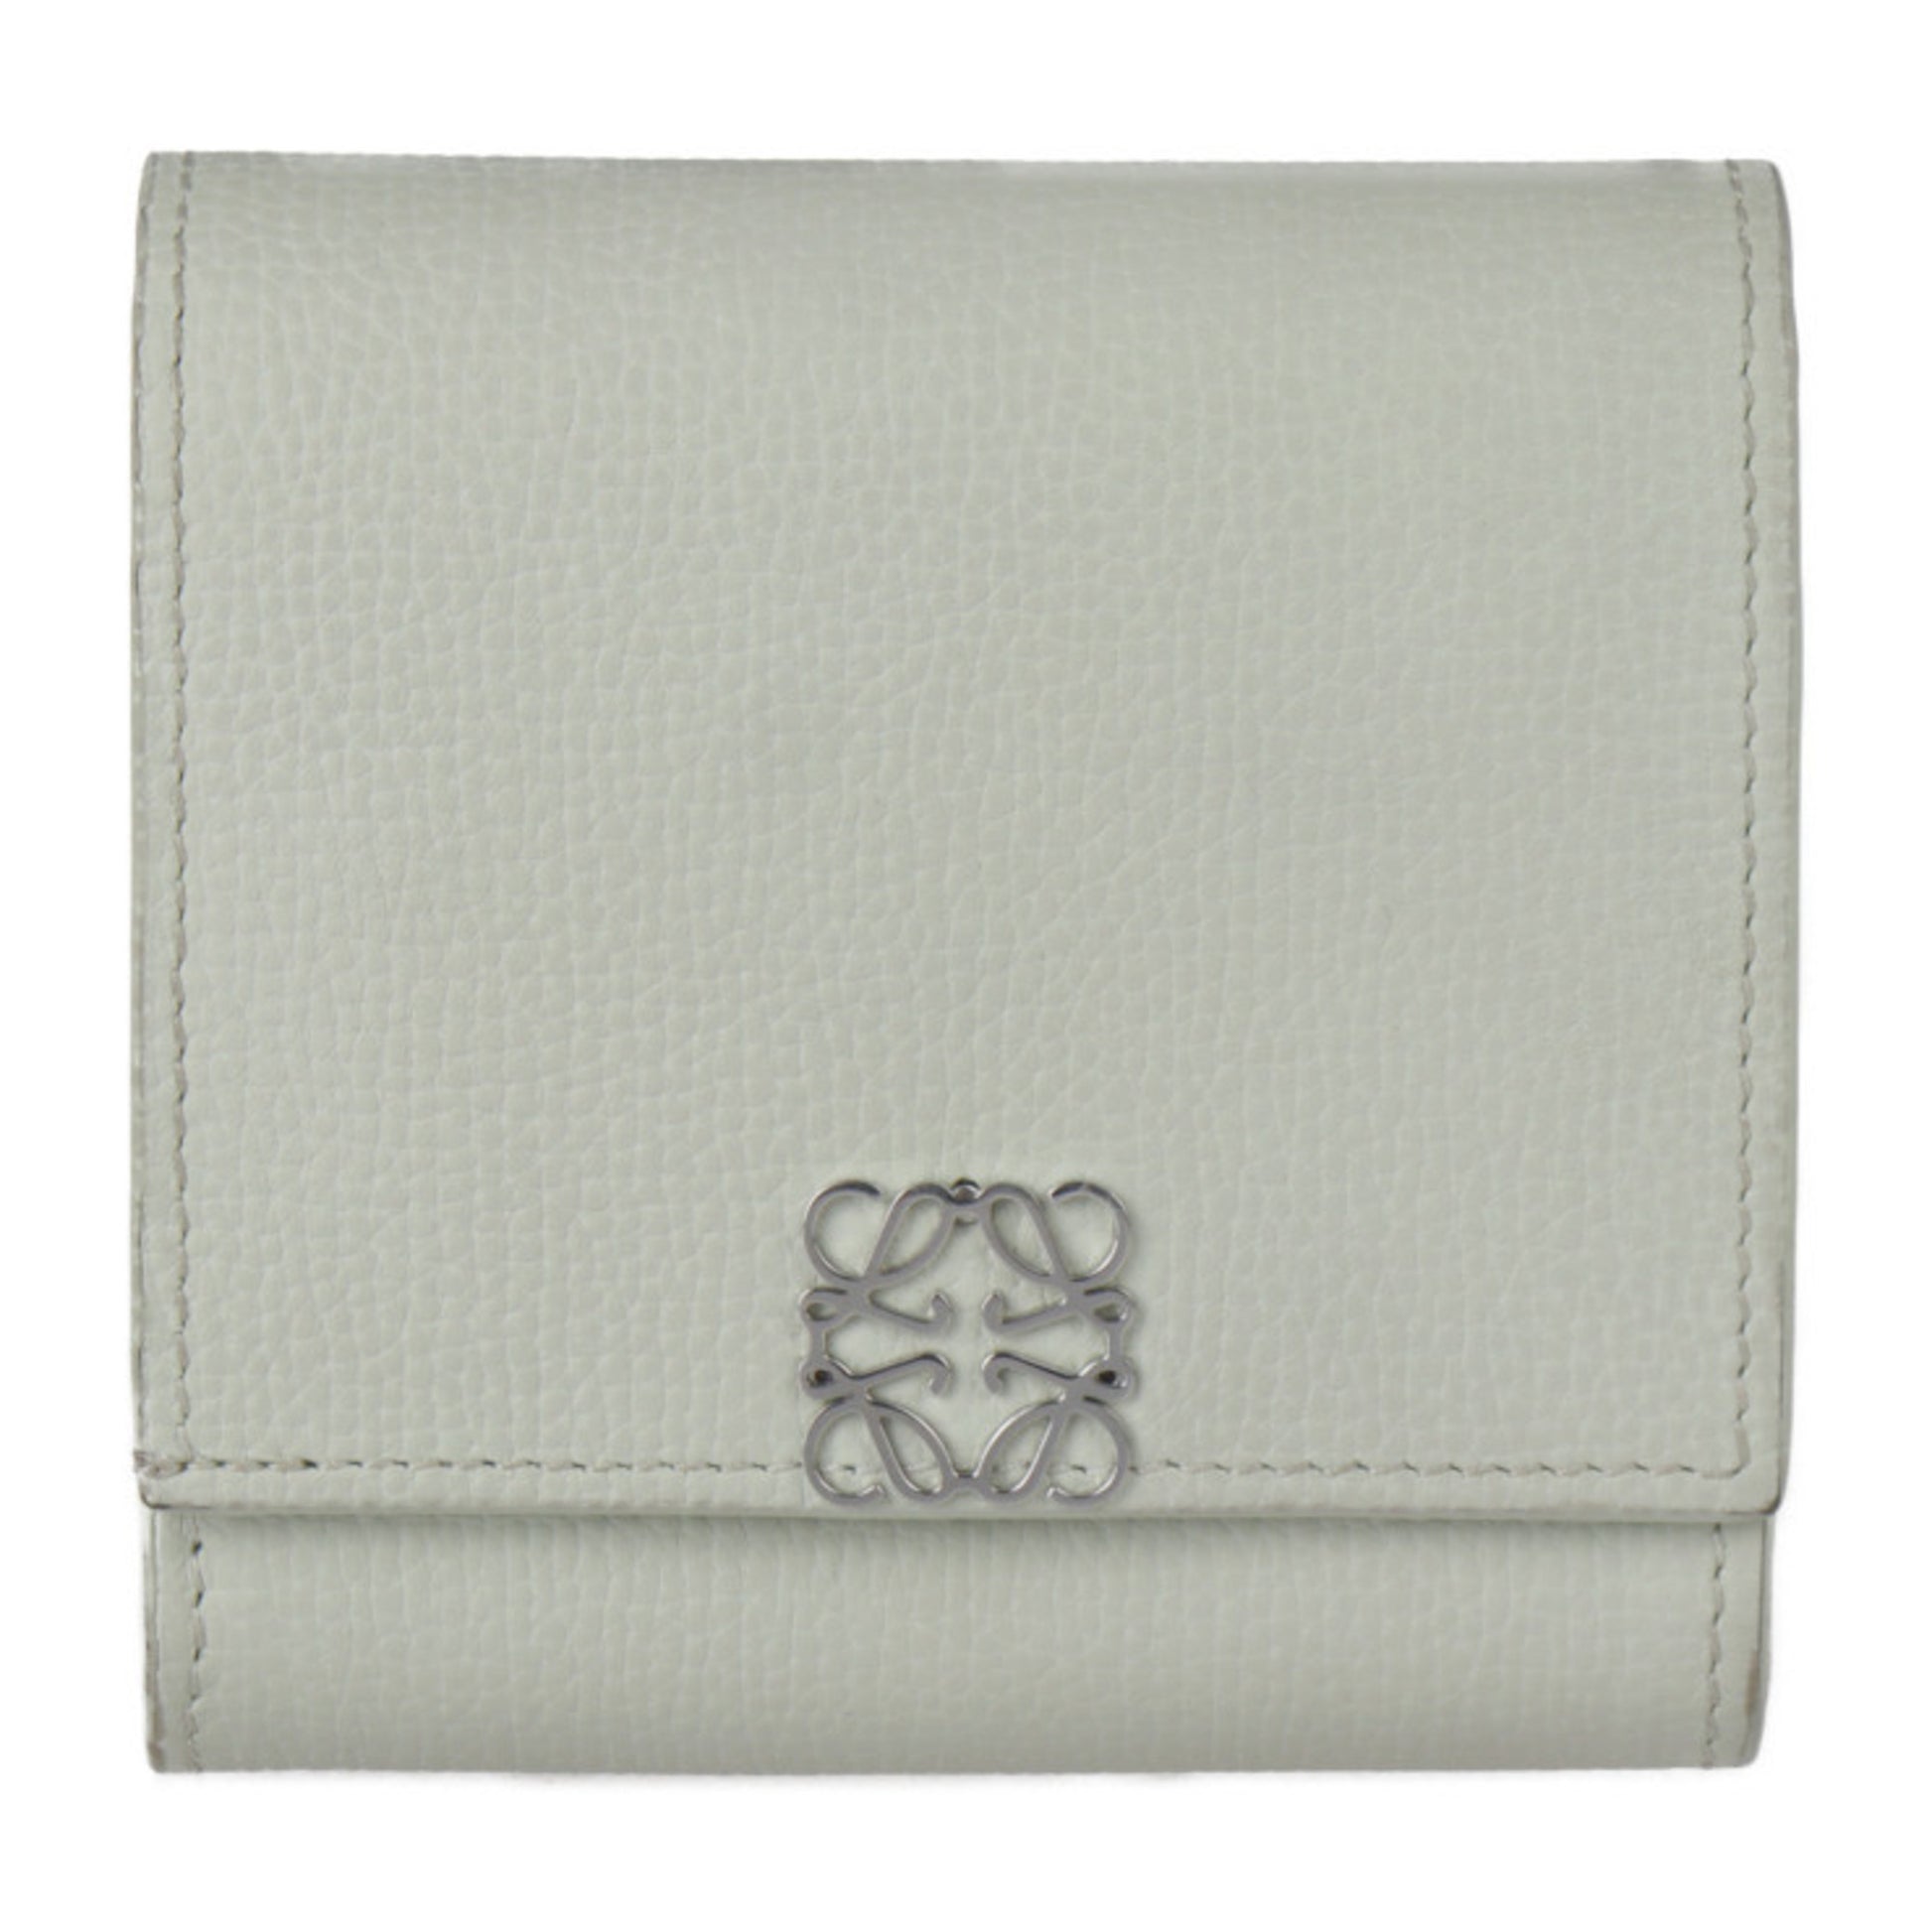 Loewe Women's Anagram Leather Trifold Wallet